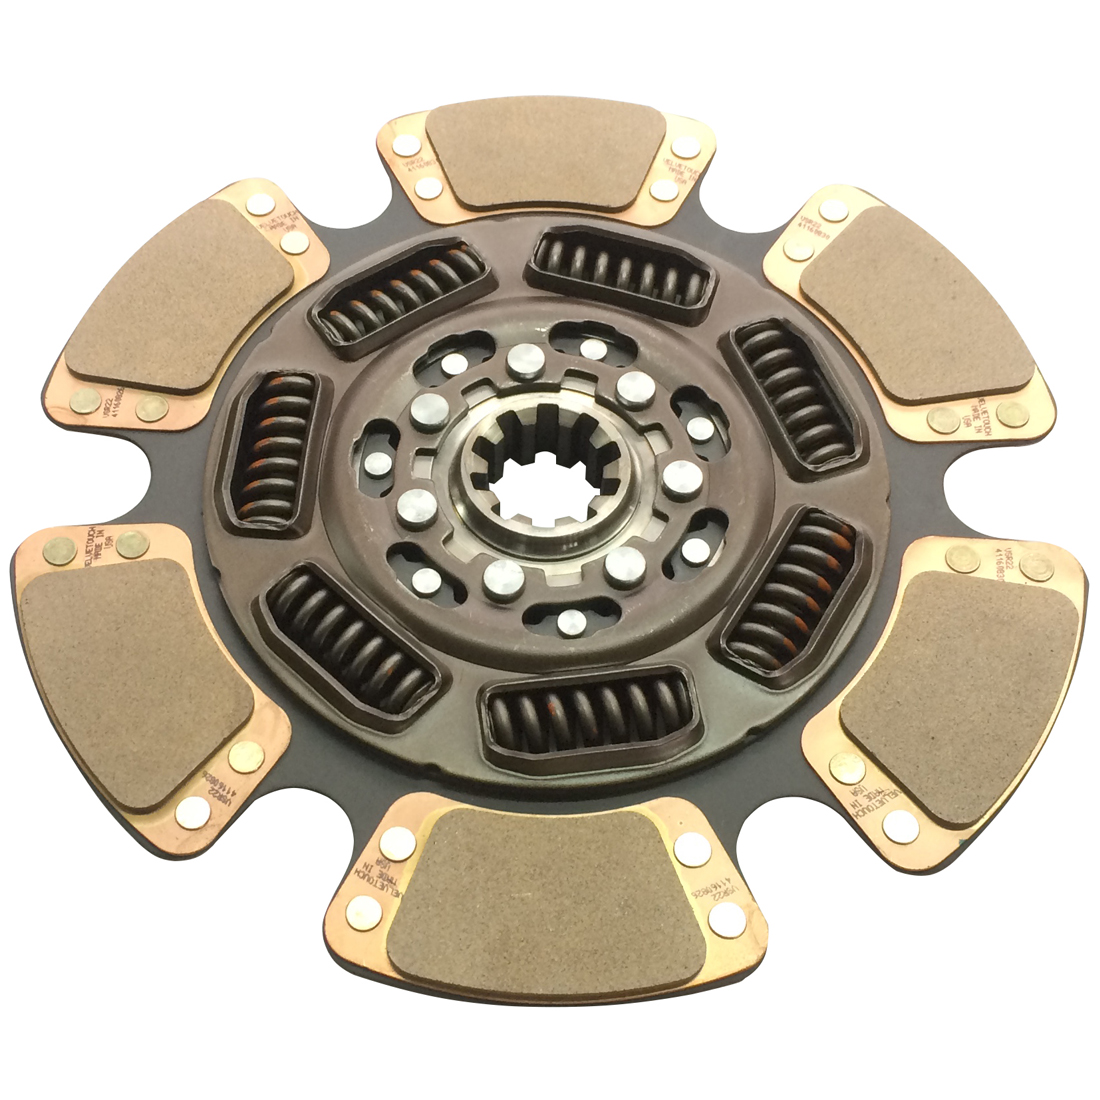 OEM 15-1/2" x 10T x 2" Terbon Heavy Duty Truck Drive System Parts 6 Paddle 7 Springs 128709 Clutch Disc Kit